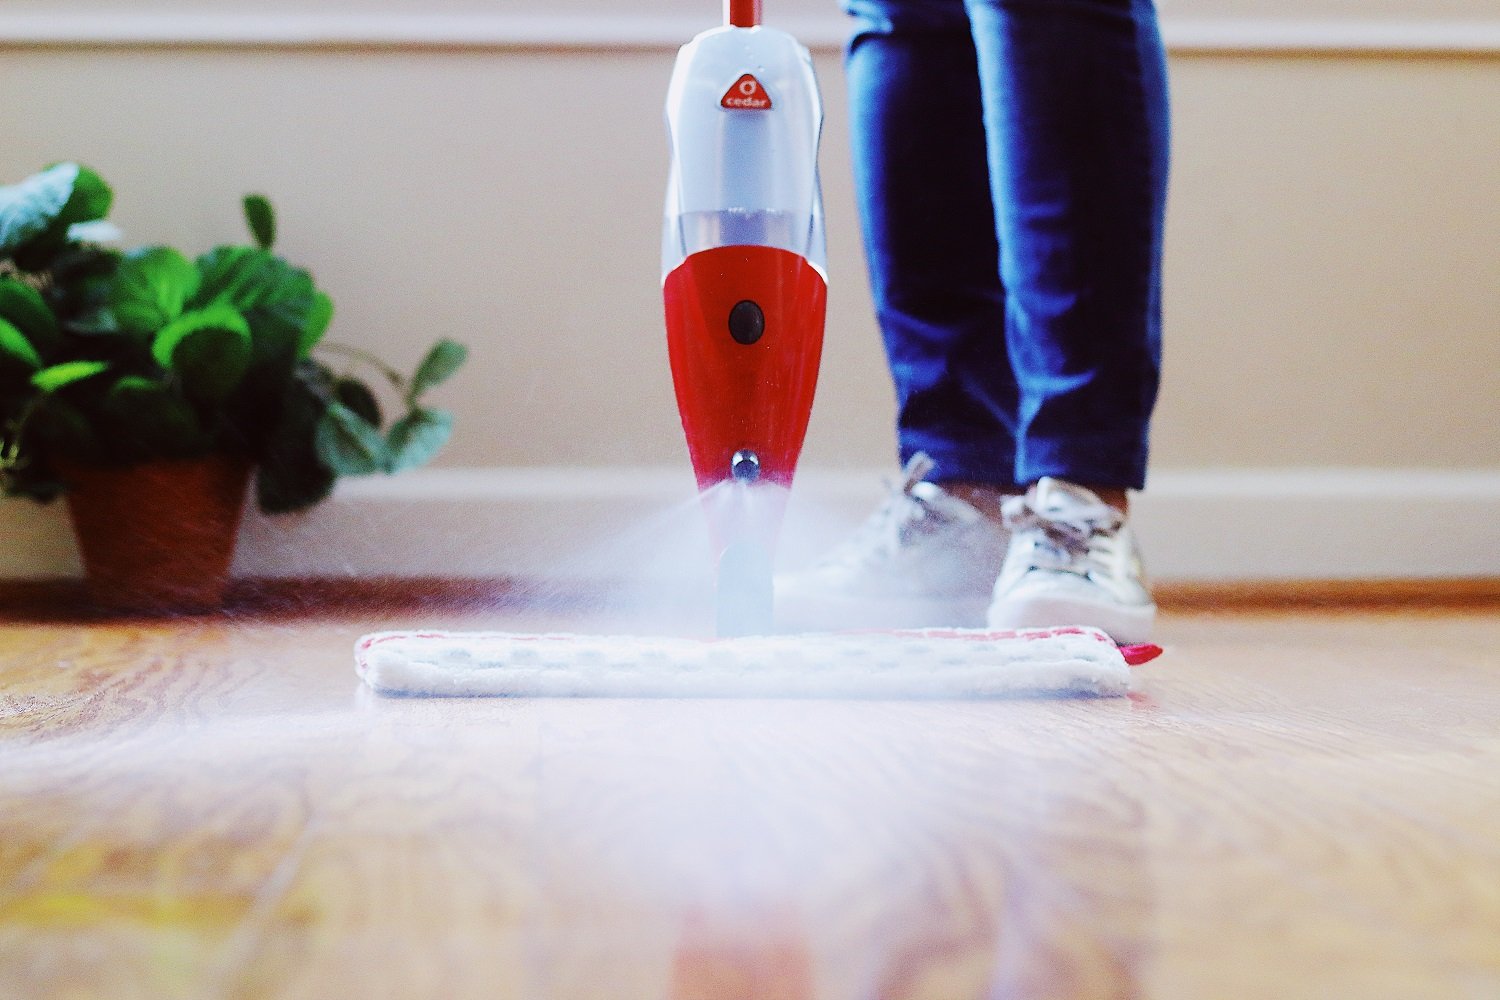 Choosing a Quality Home Cleaning Company